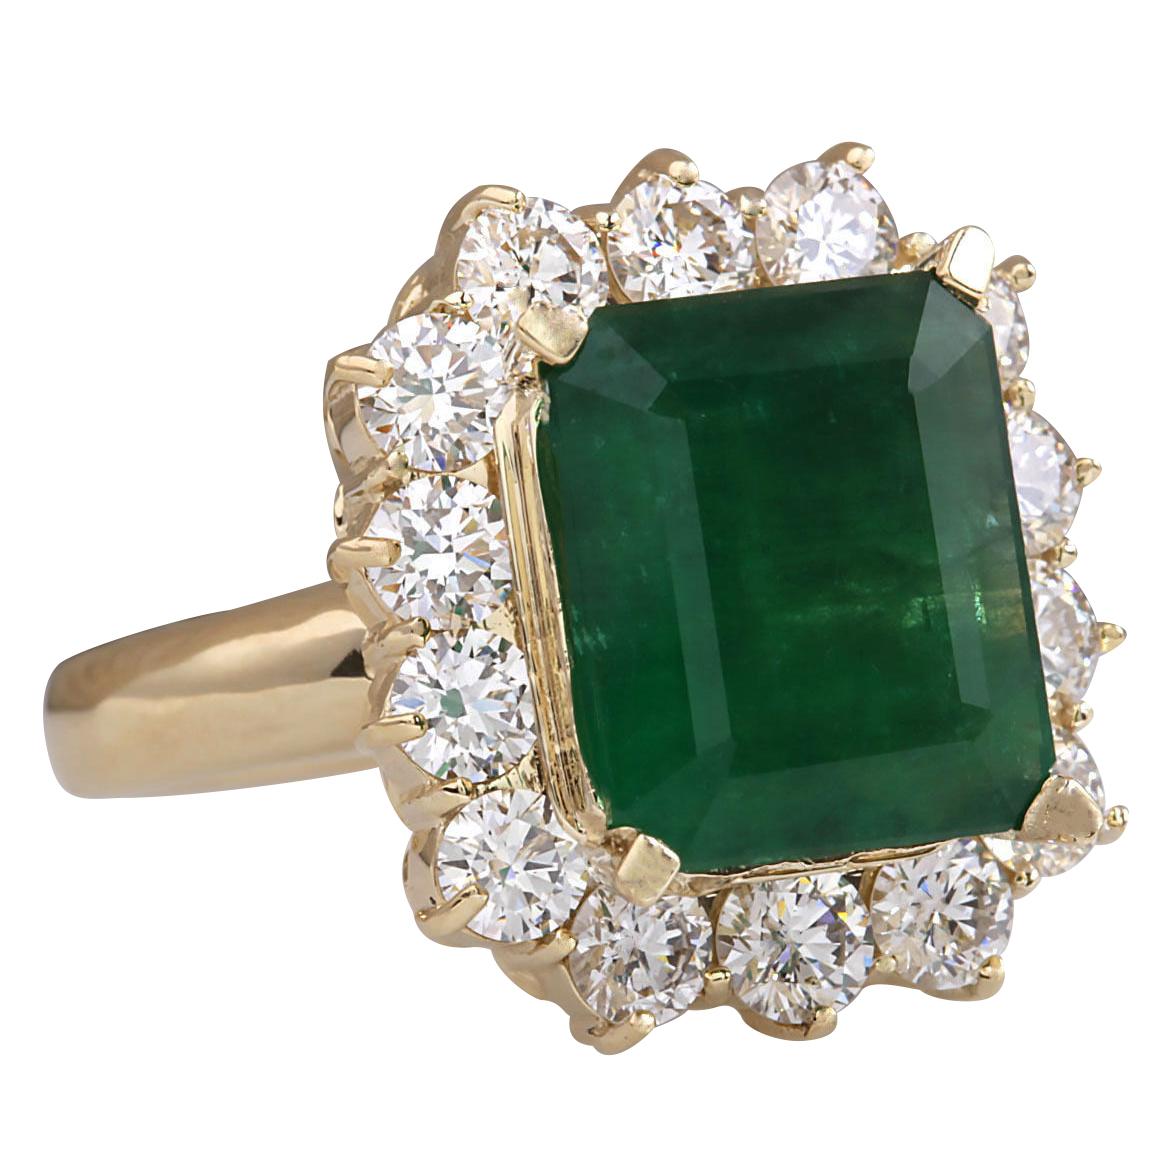 Discover elegance redefined with our exquisite 14K Yellow Gold Diamond Ring. This stunning piece, weighing 7.6 grams and adorned with a 6.68 Carat Emerald centerpiece, epitomizes timeless beauty. The emerald, measuring 12.00x10.00 mm, captivates